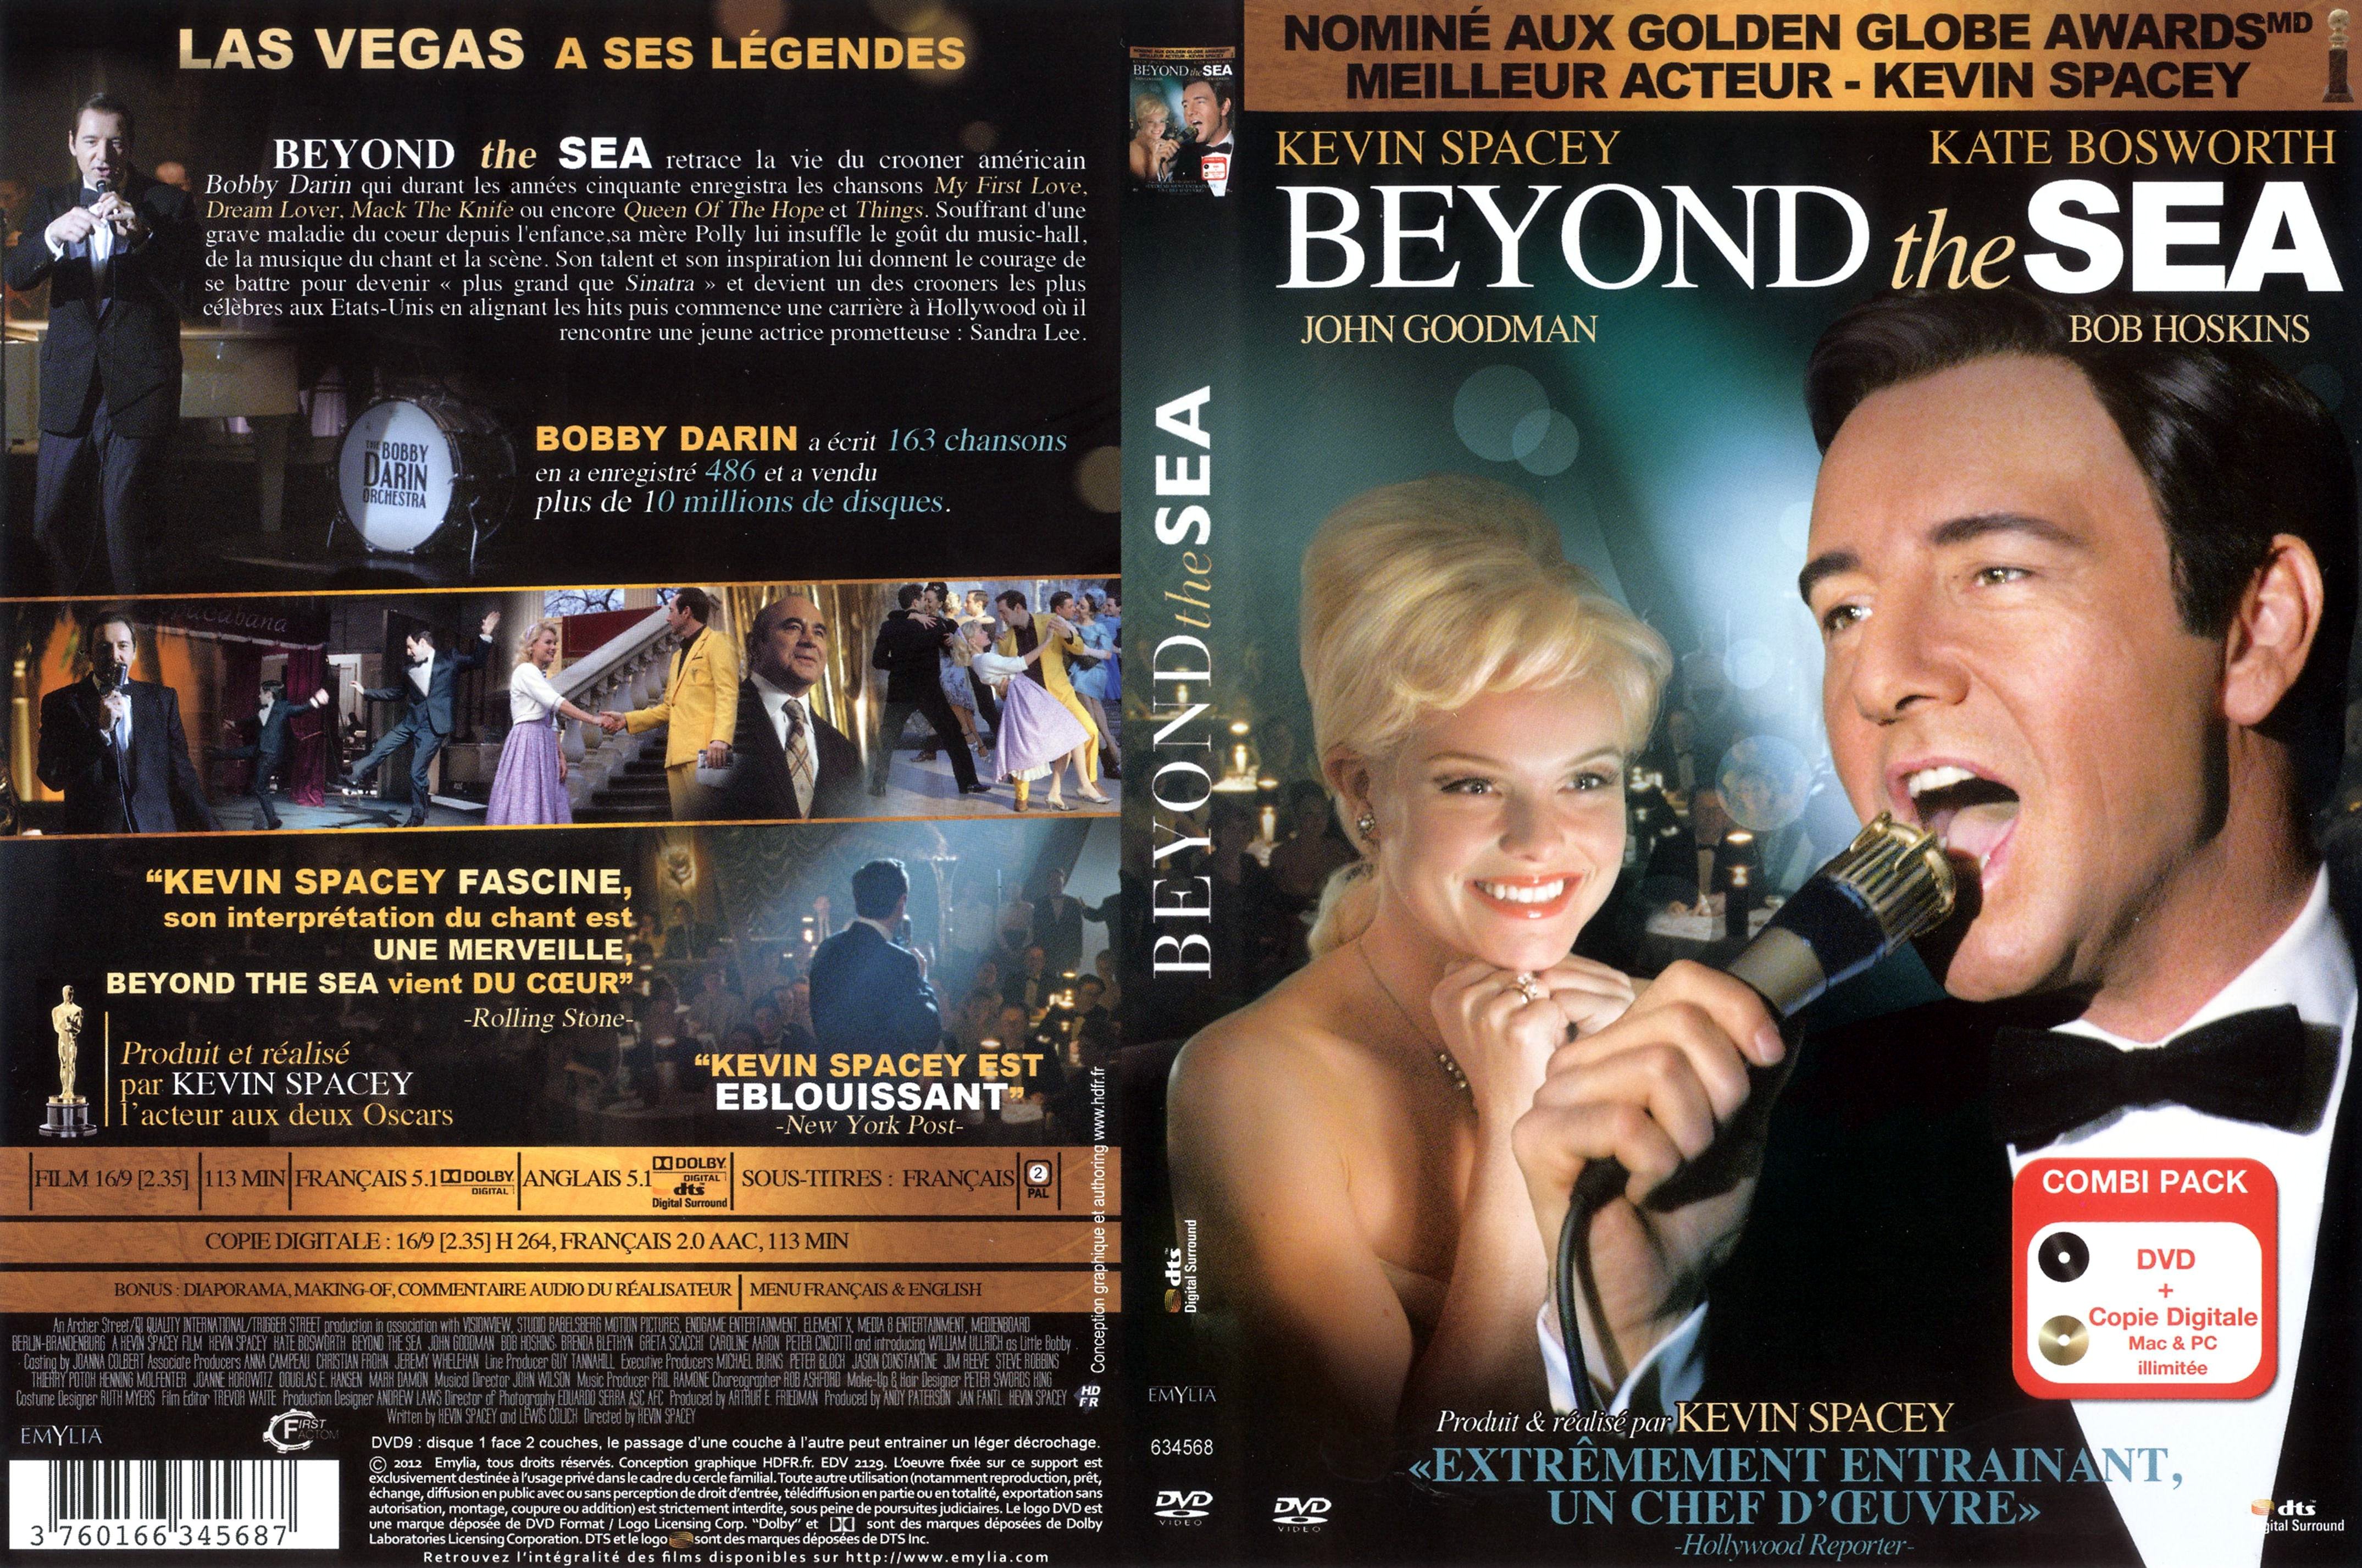 Jaquette DVD Beyond the sea v2